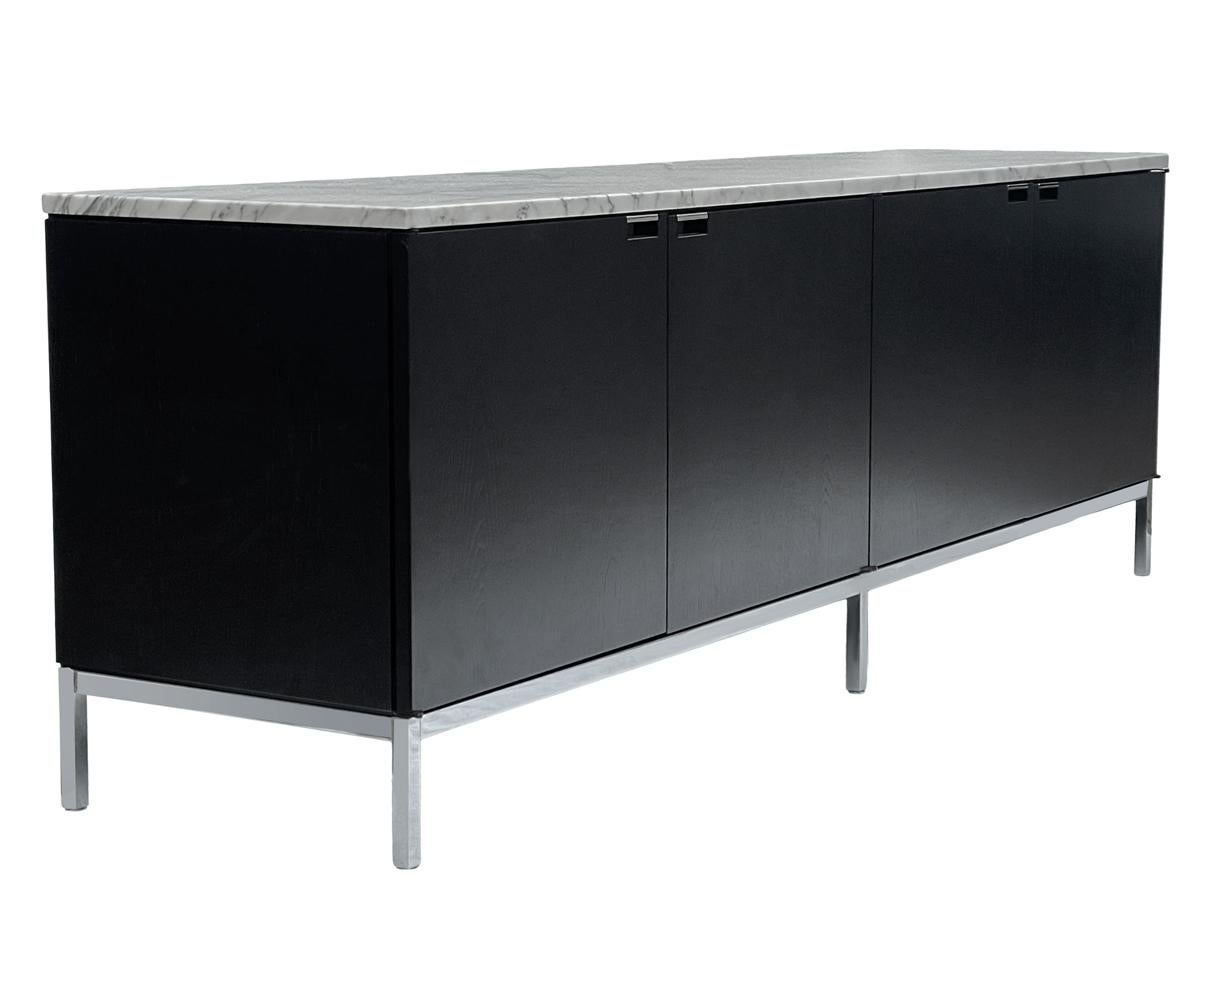 American Mid-Century Modern Florence Knoll Marble Credenza or Media Cabinet in Ebony Wood